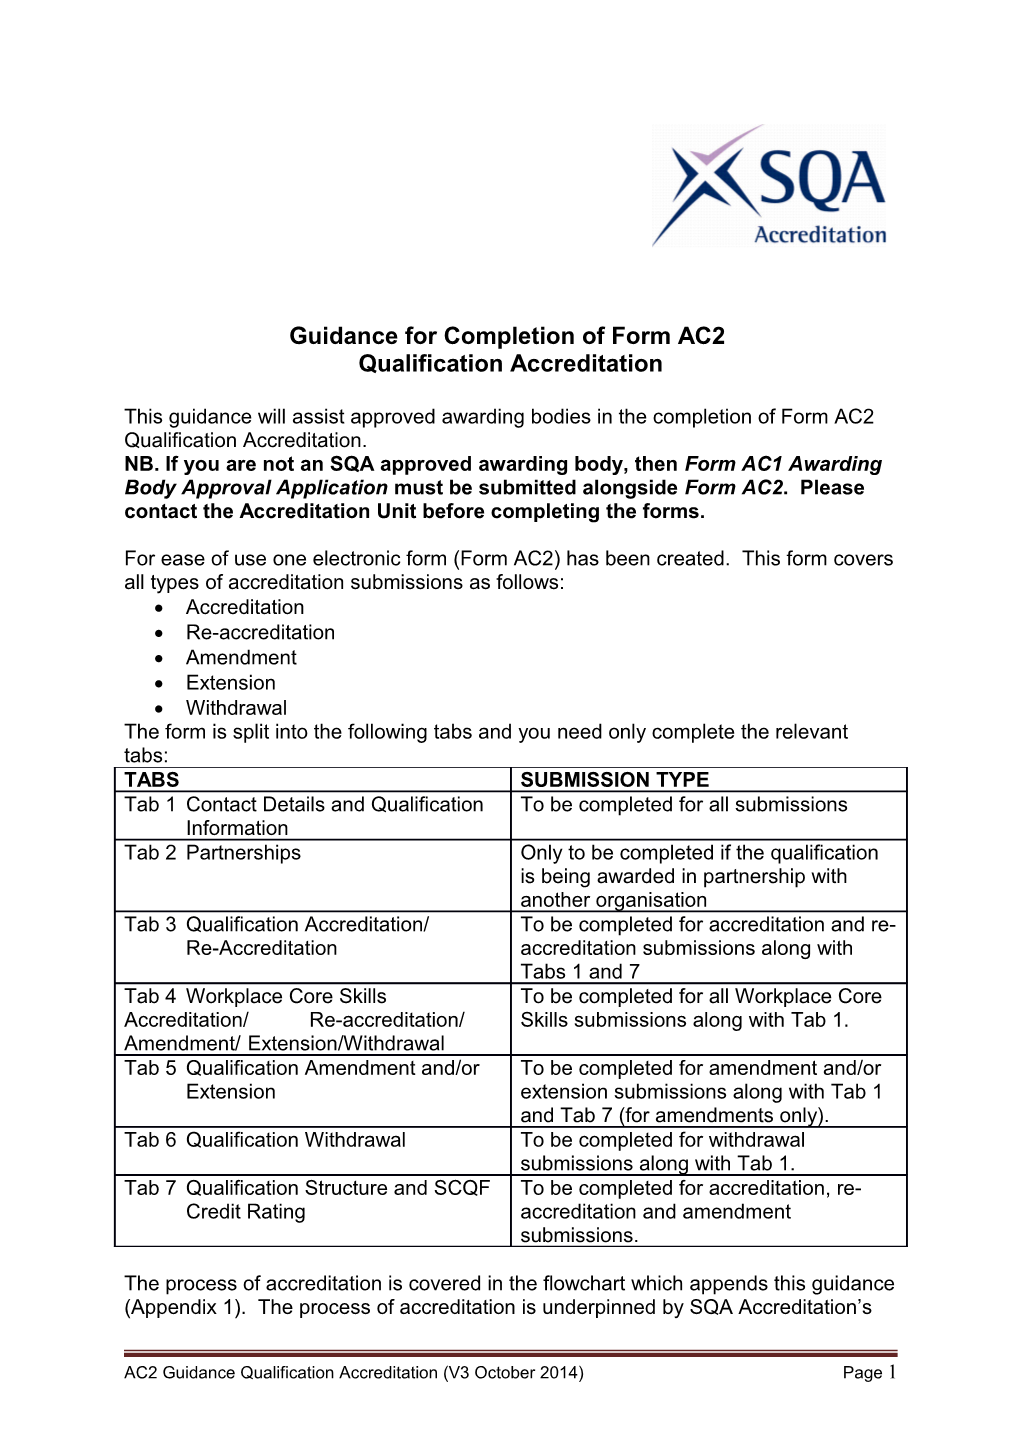 Guidance Forcompletion of Form AC2